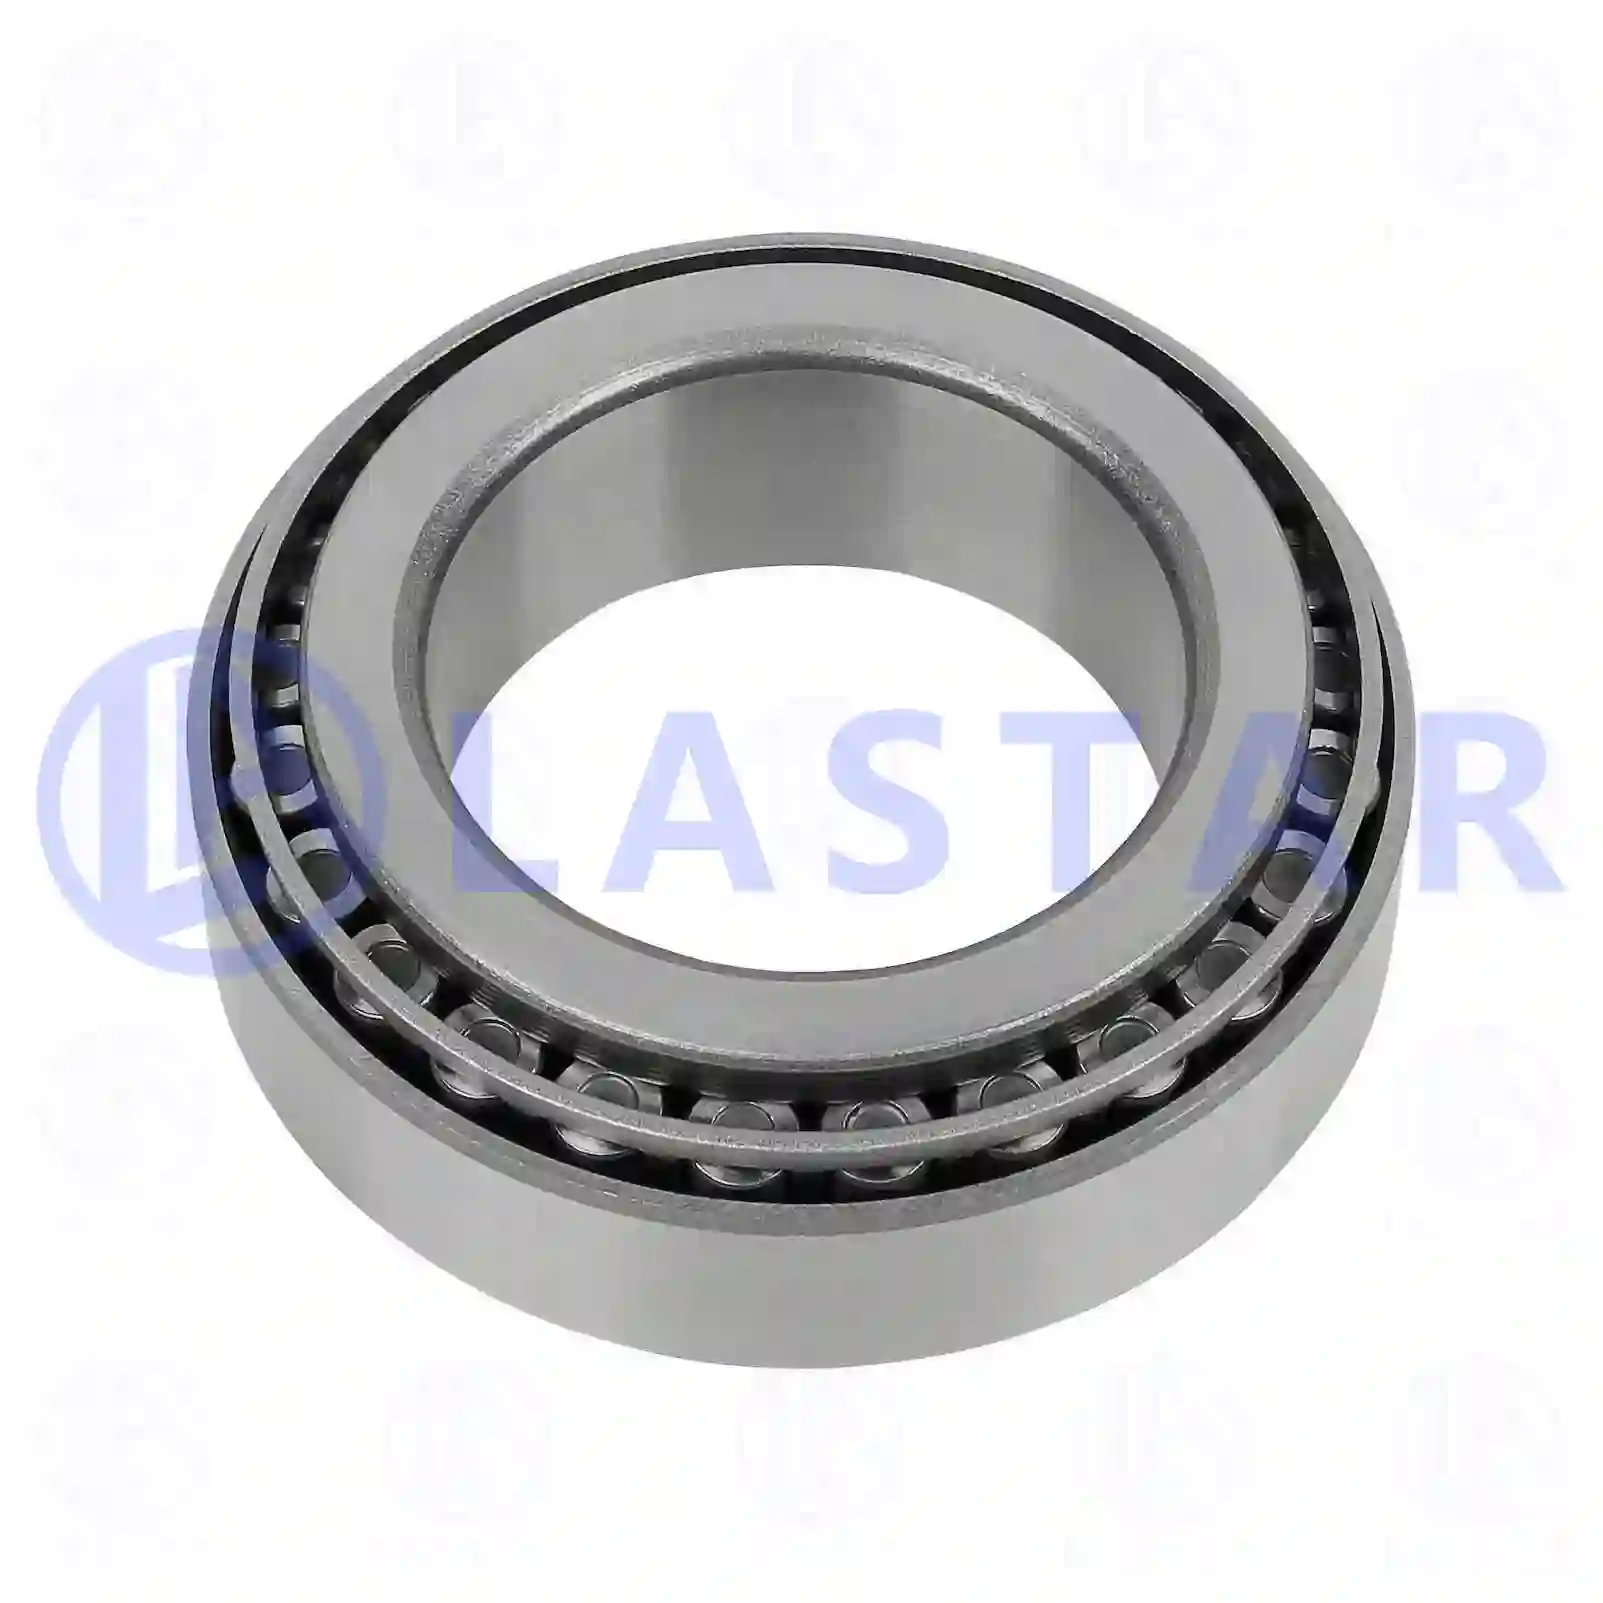 Bearings Tapered roller bearing, la no: 77725210 ,  oem no:0029819305, 0039814305, 0059814405, 0079815705, 0099819305, 184849, ZG03012-0008 Lastar Spare Part | Truck Spare Parts, Auotomotive Spare Parts